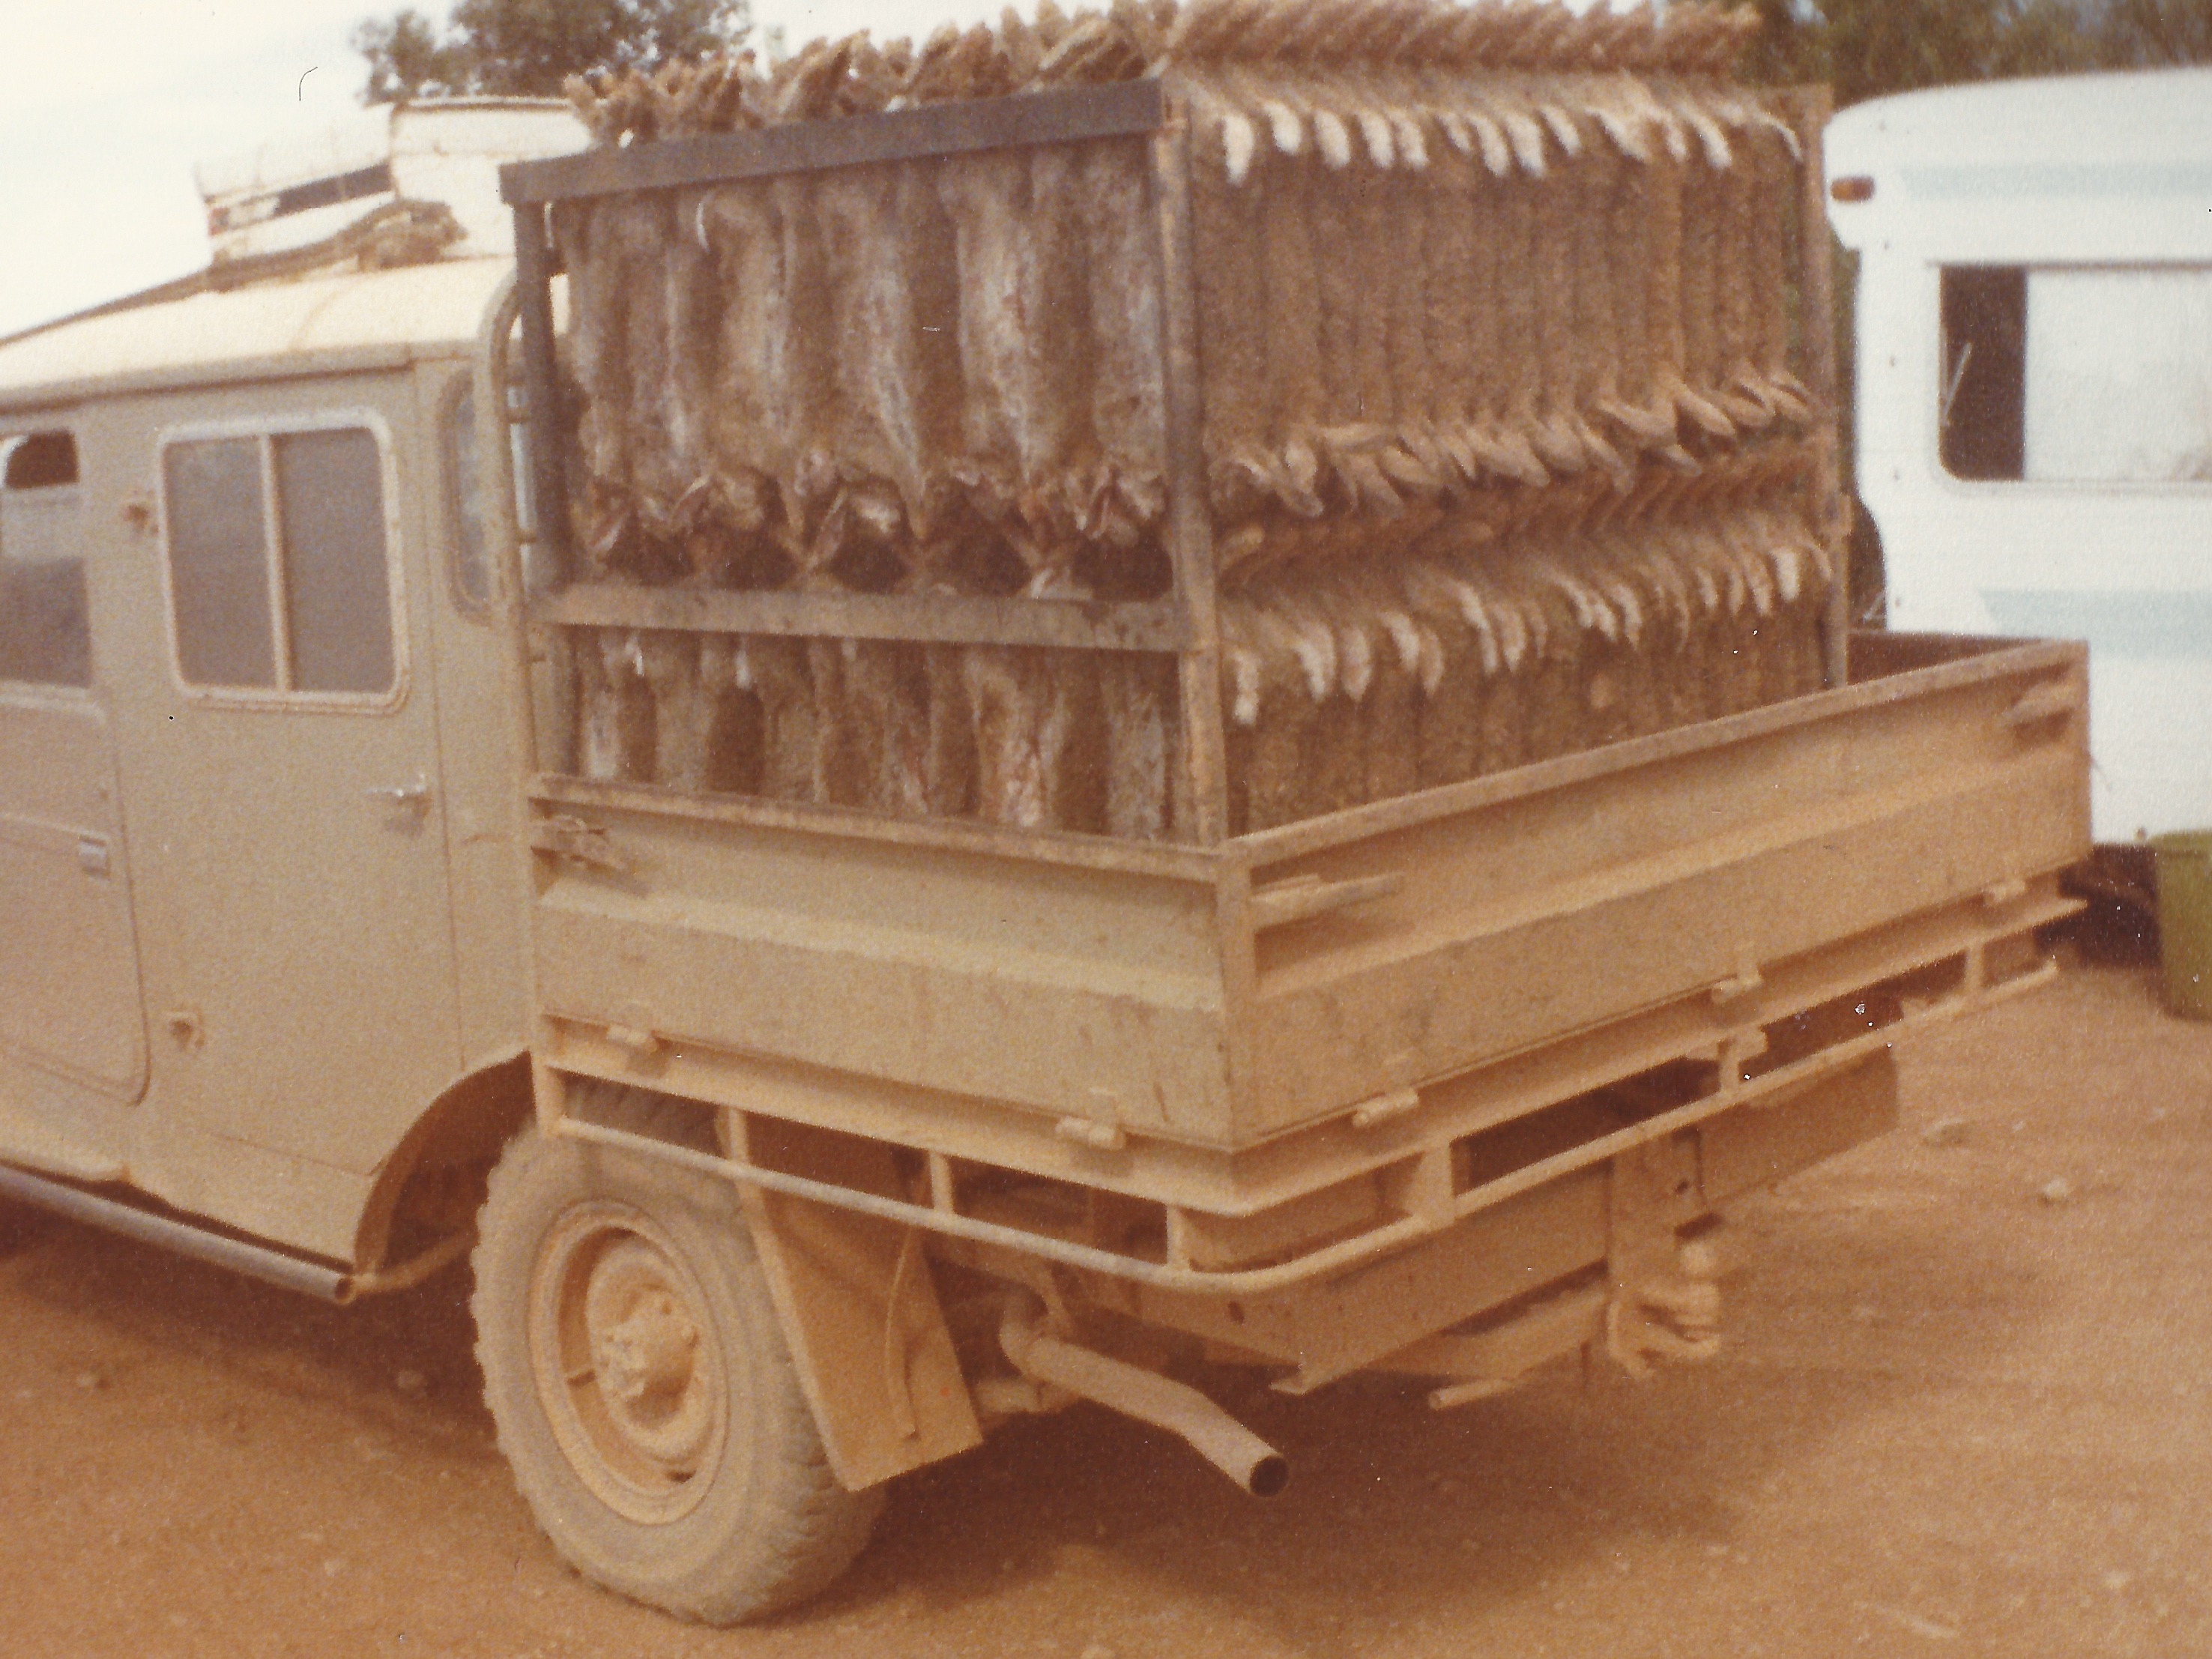 Rabbits on a truck